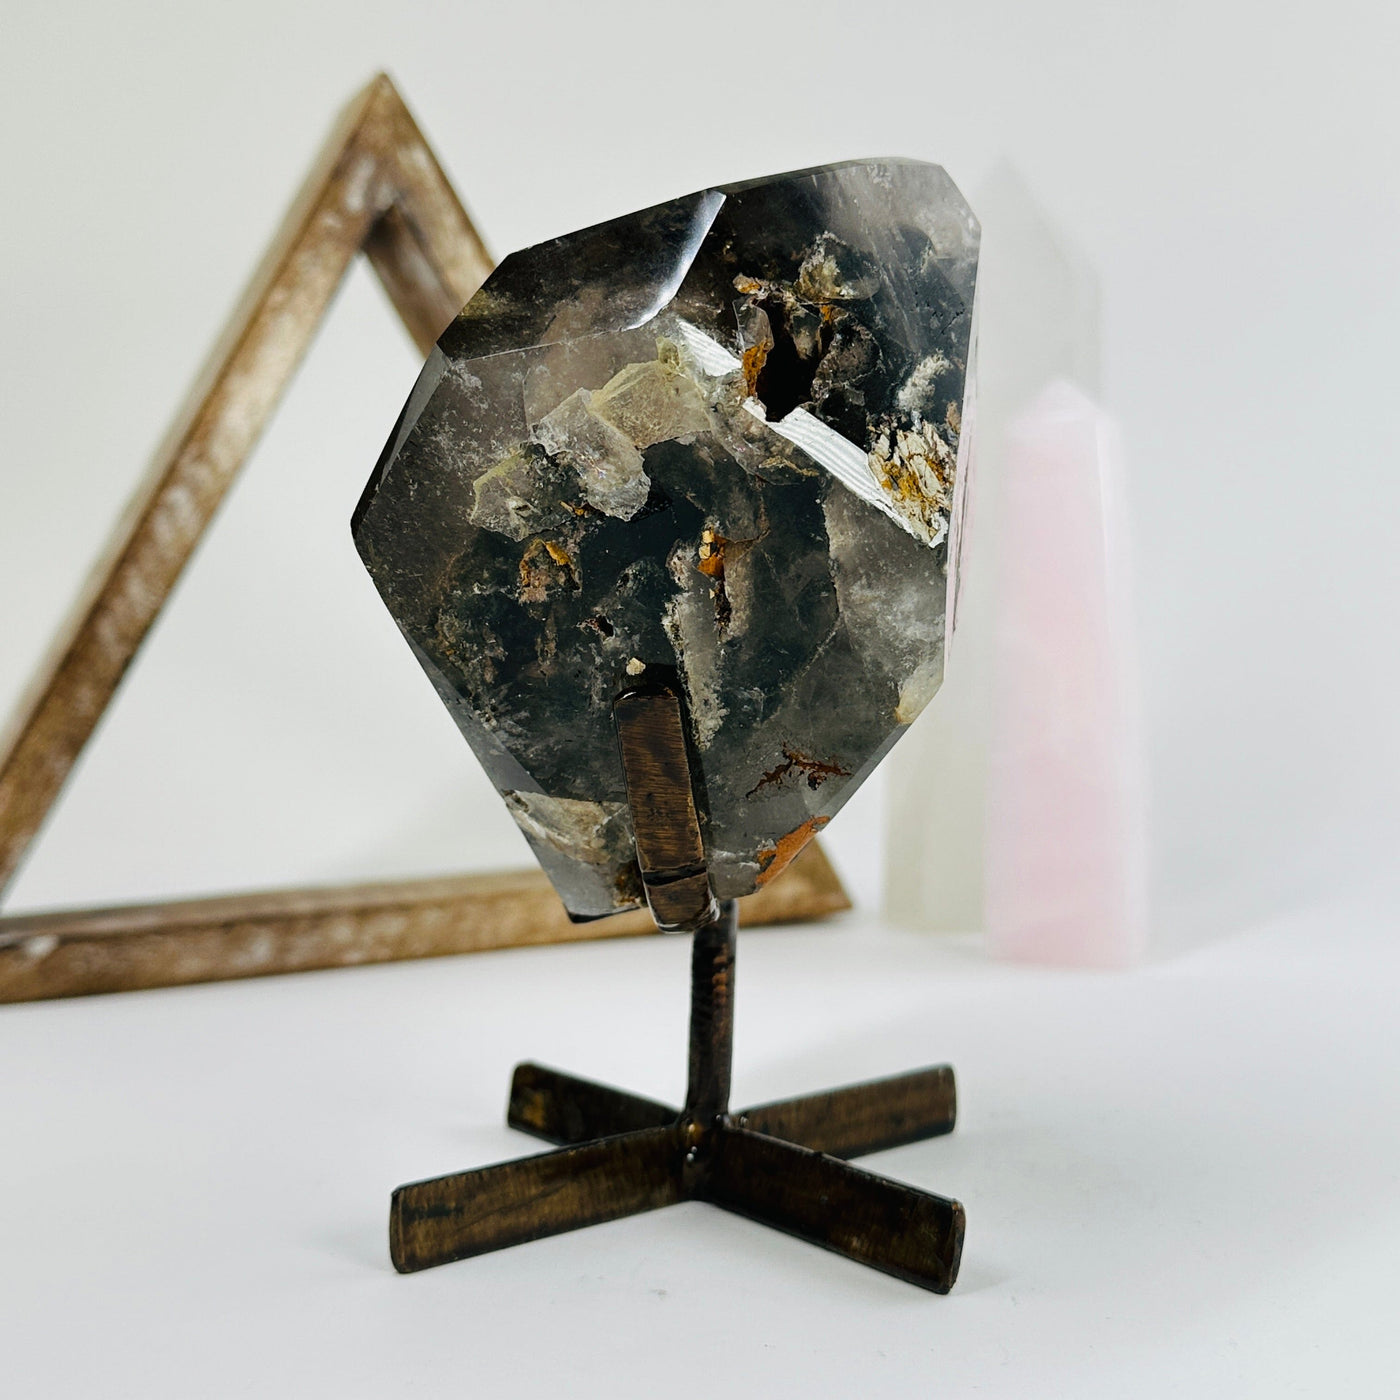 lodalite on metal stand with decorations in the background